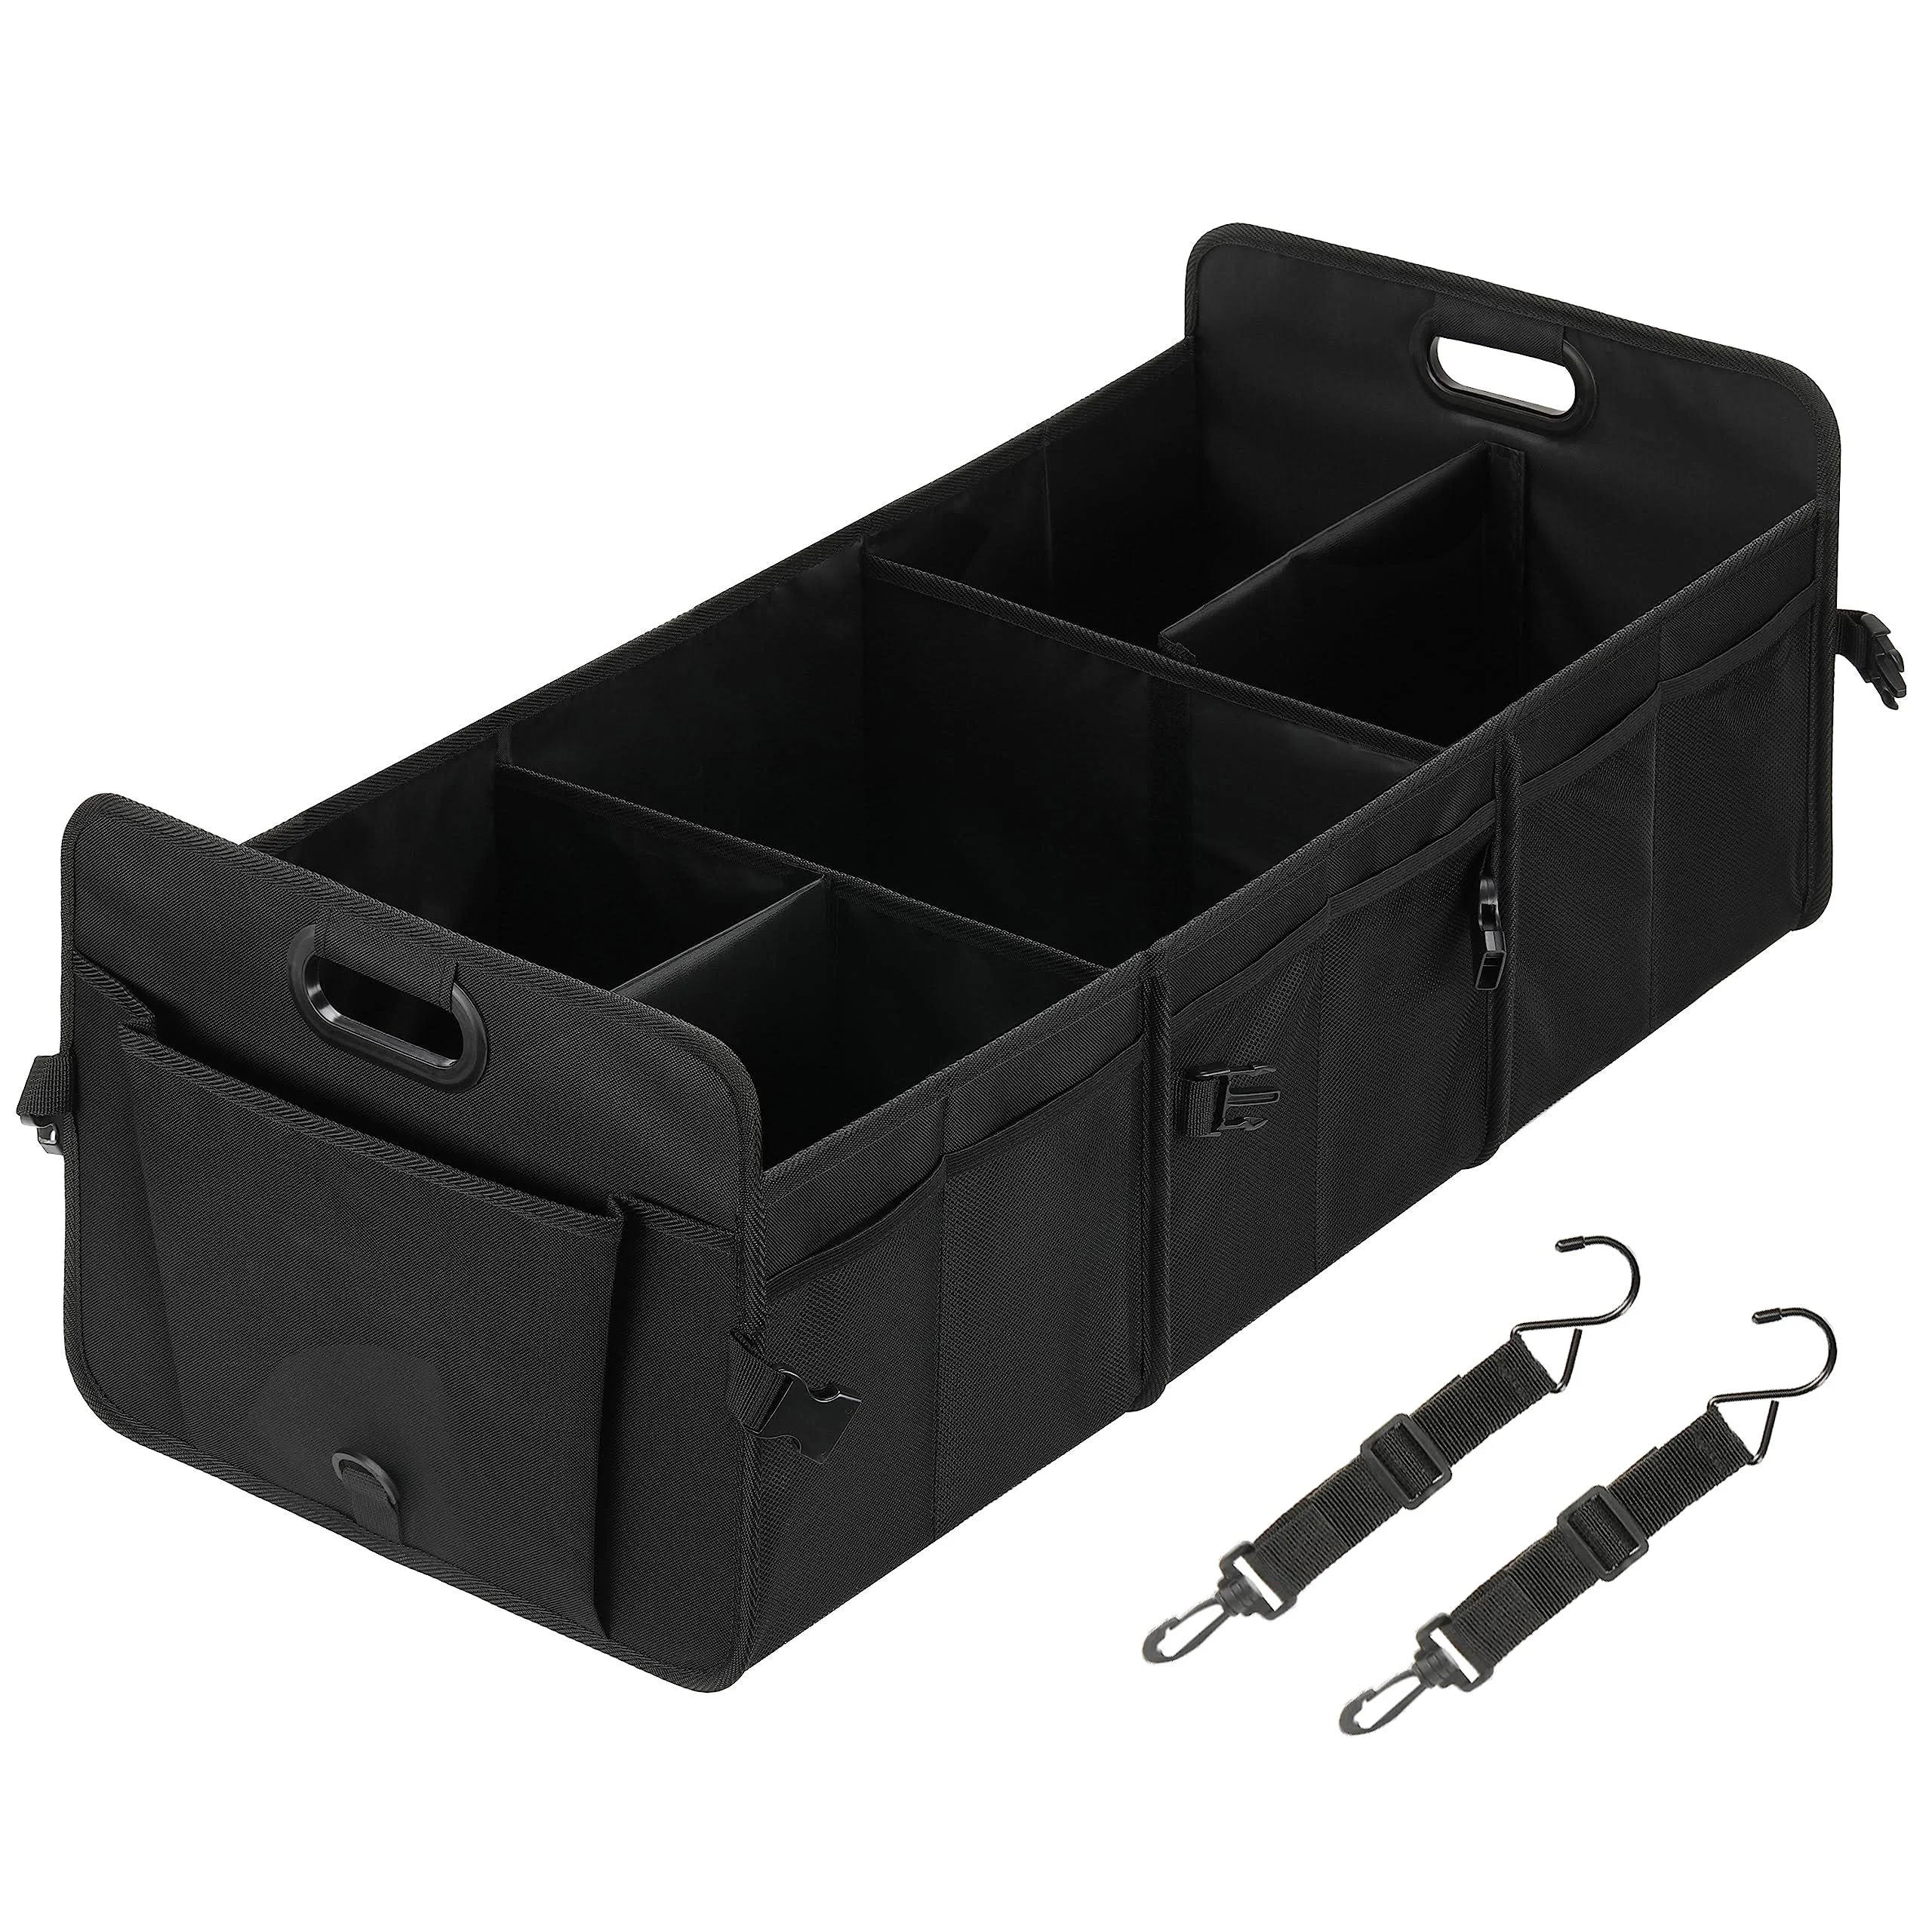 Simple Deluxe Waterproof Trunk Storage Organizer for Adults | Image